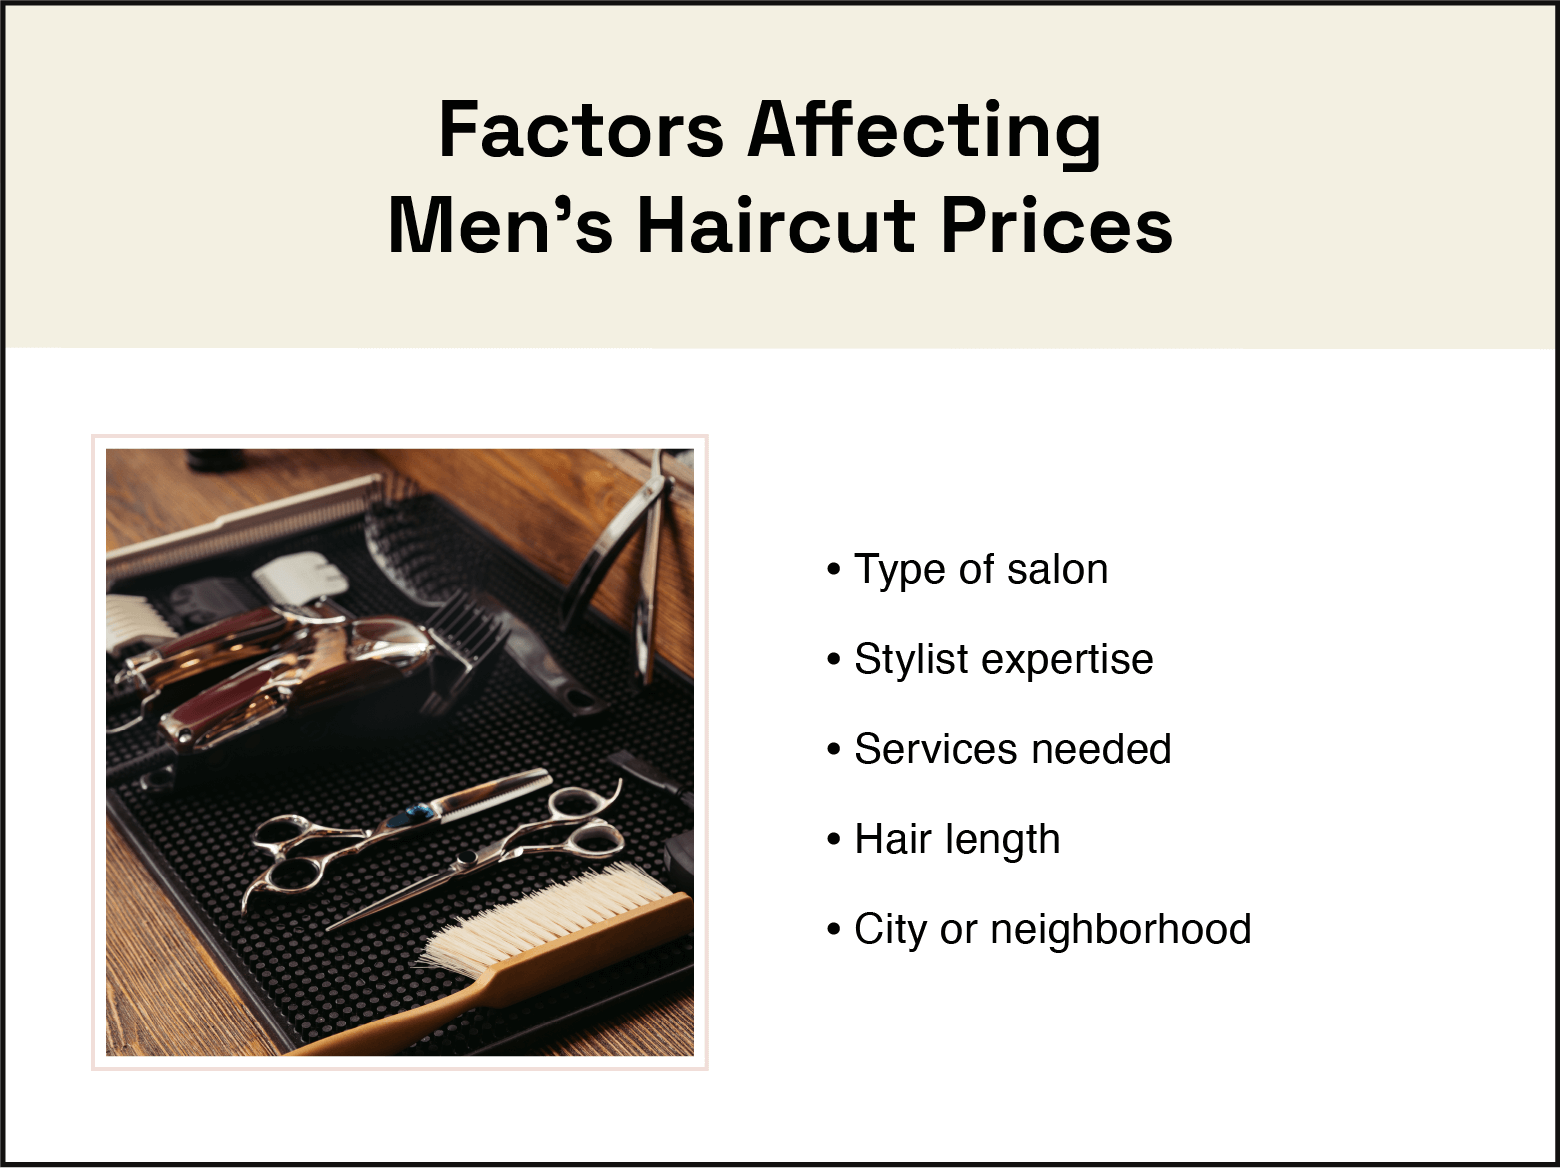 photo of barber’s tool on the left, bulleted list on the right of factors affecting men’s haircut prices